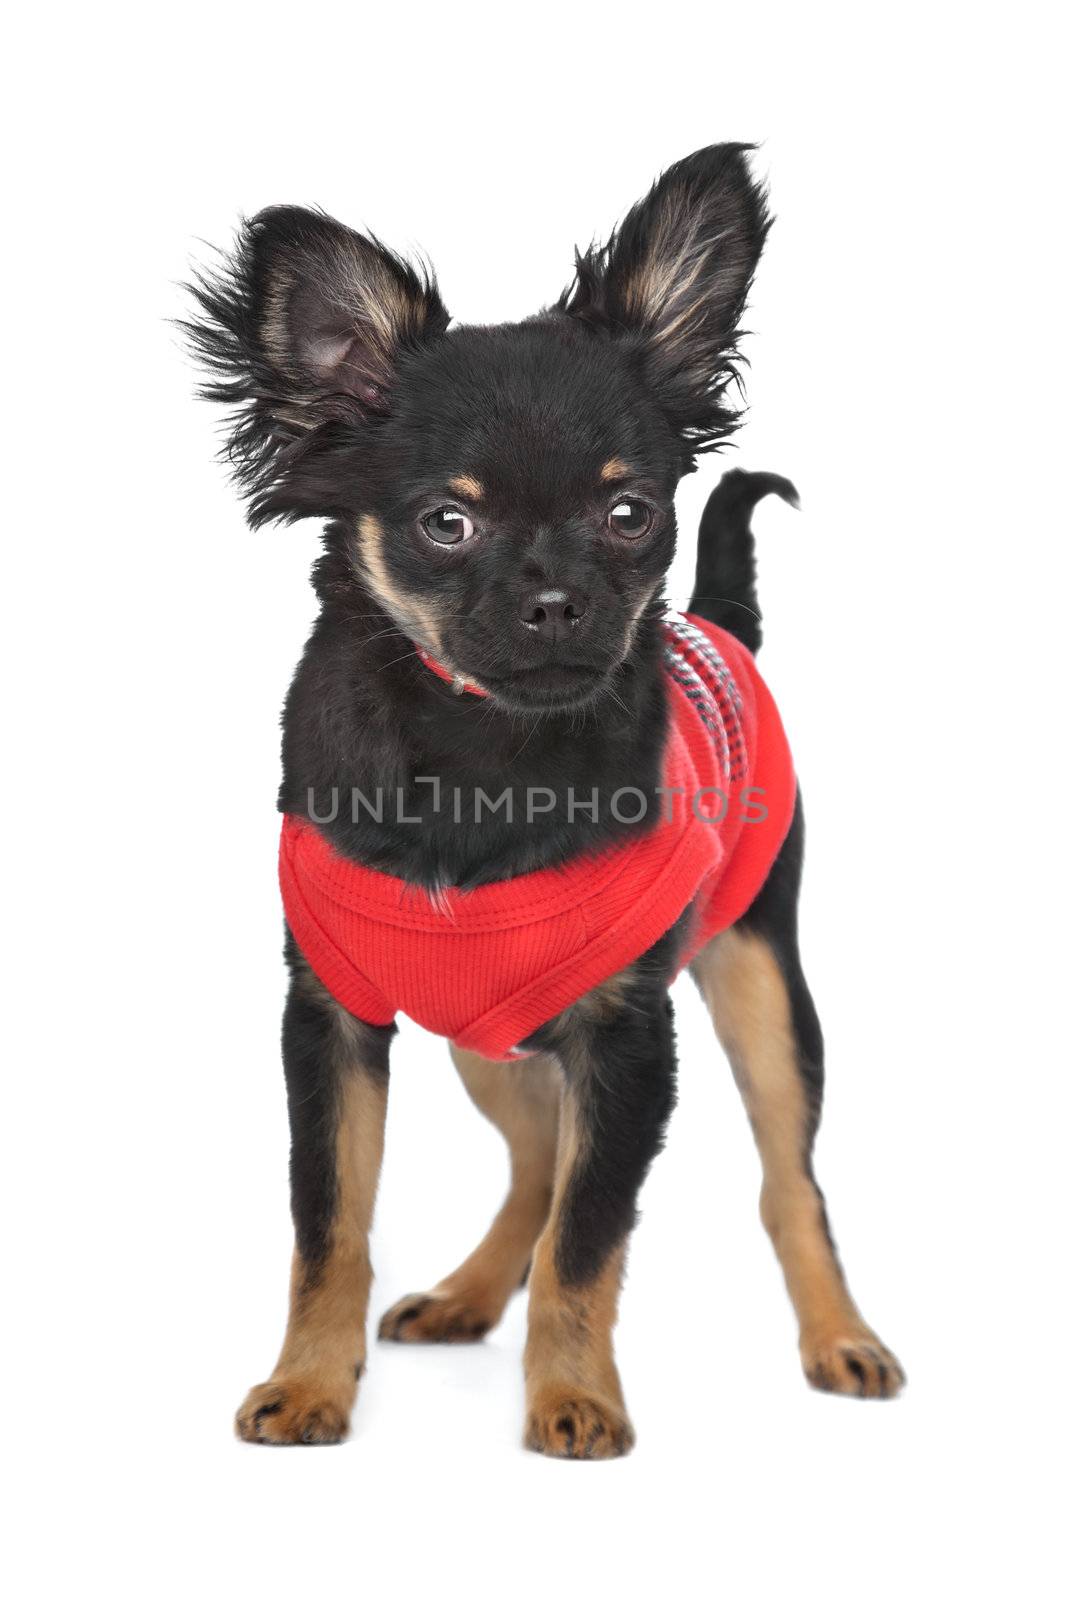 chihuahua with red shirt by eriklam